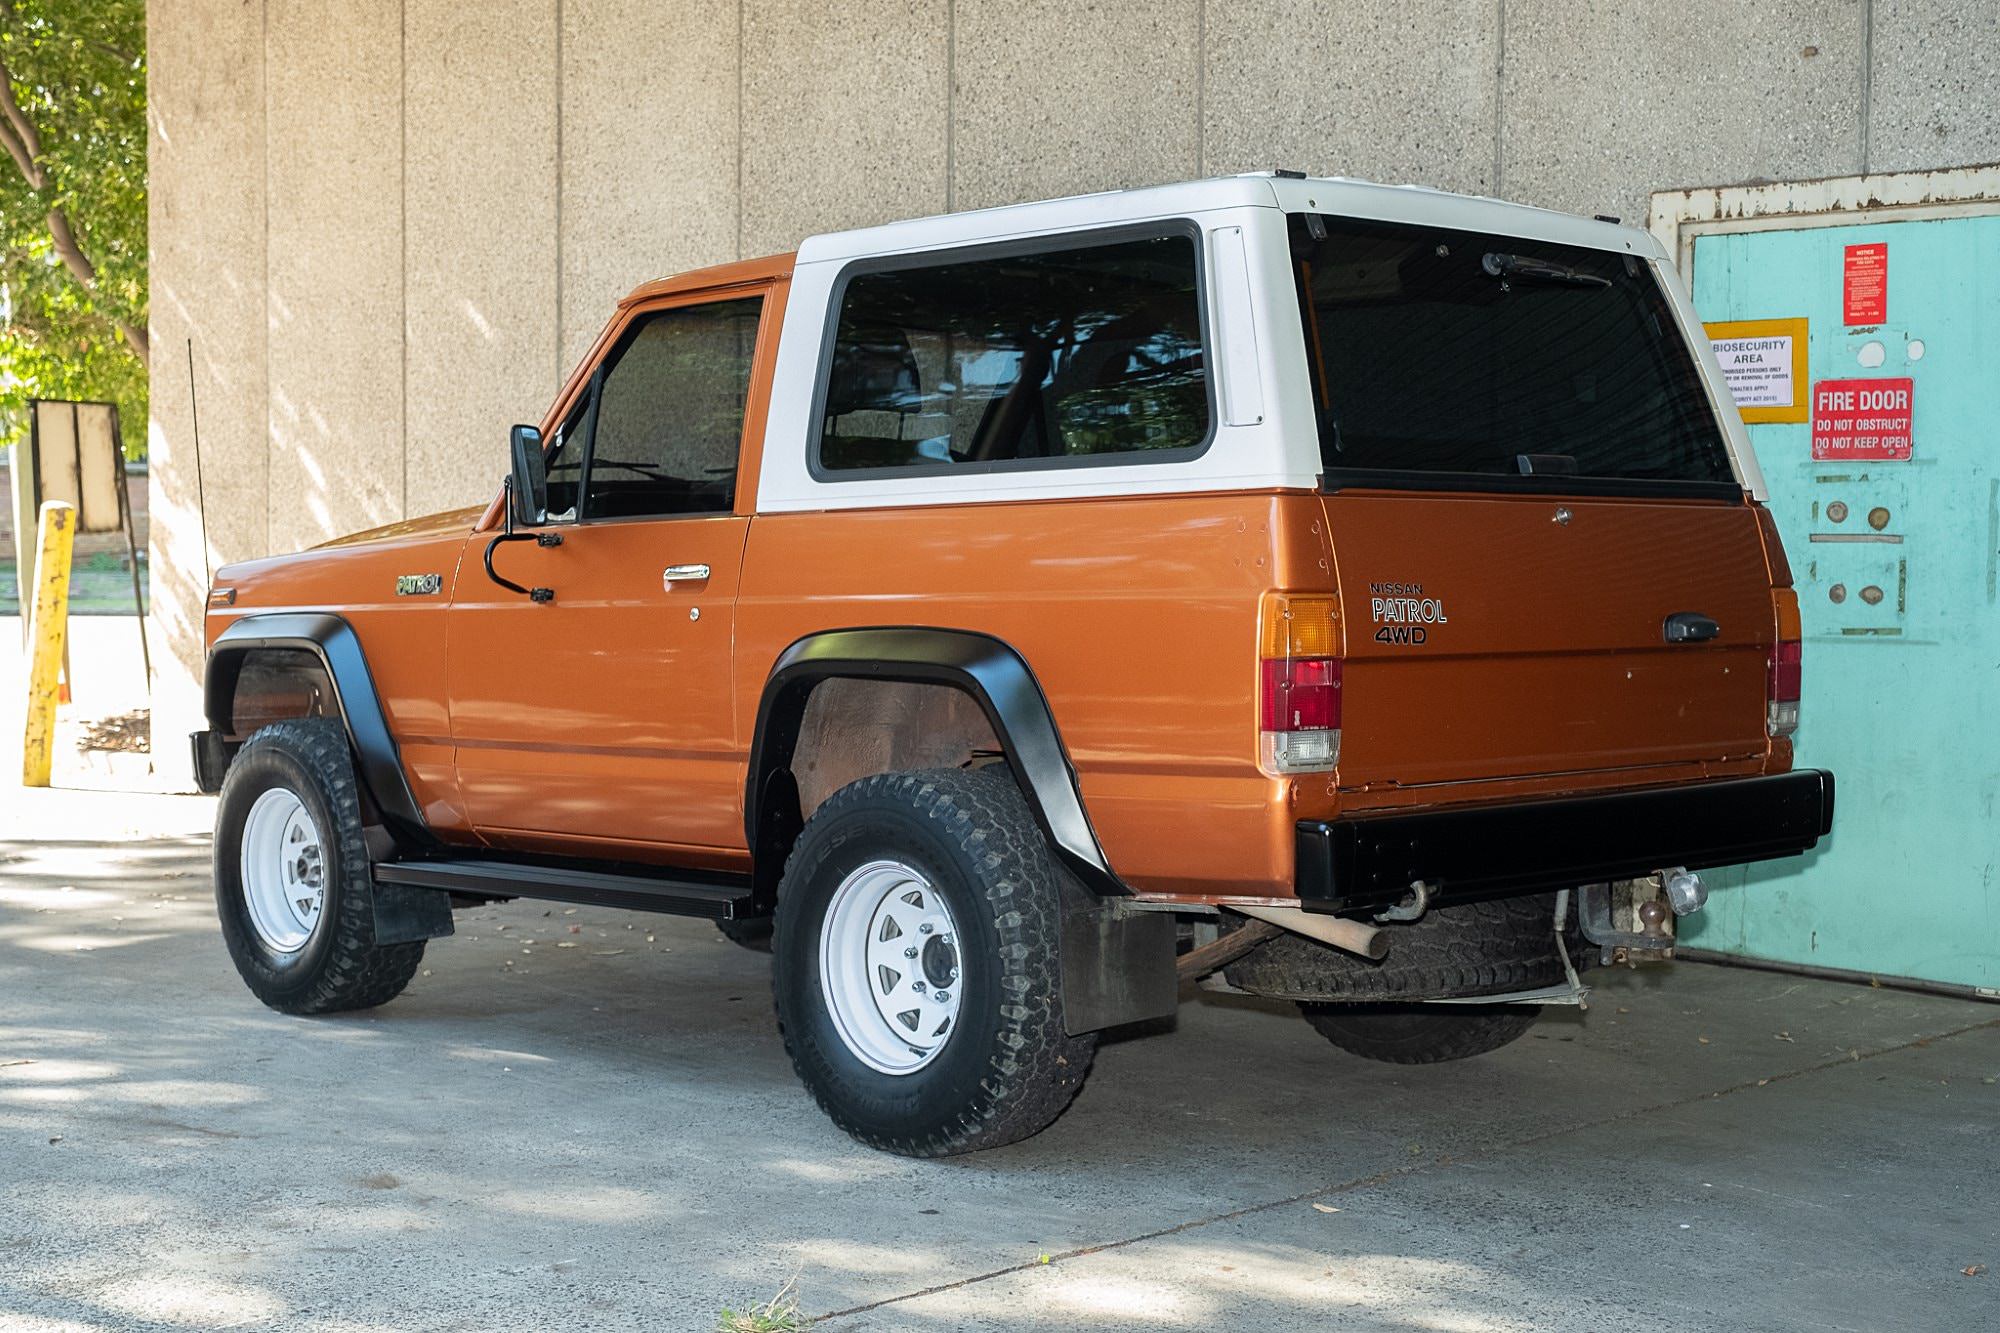 Time Capsule Condition: 1983 Nissan Patrol 4x4